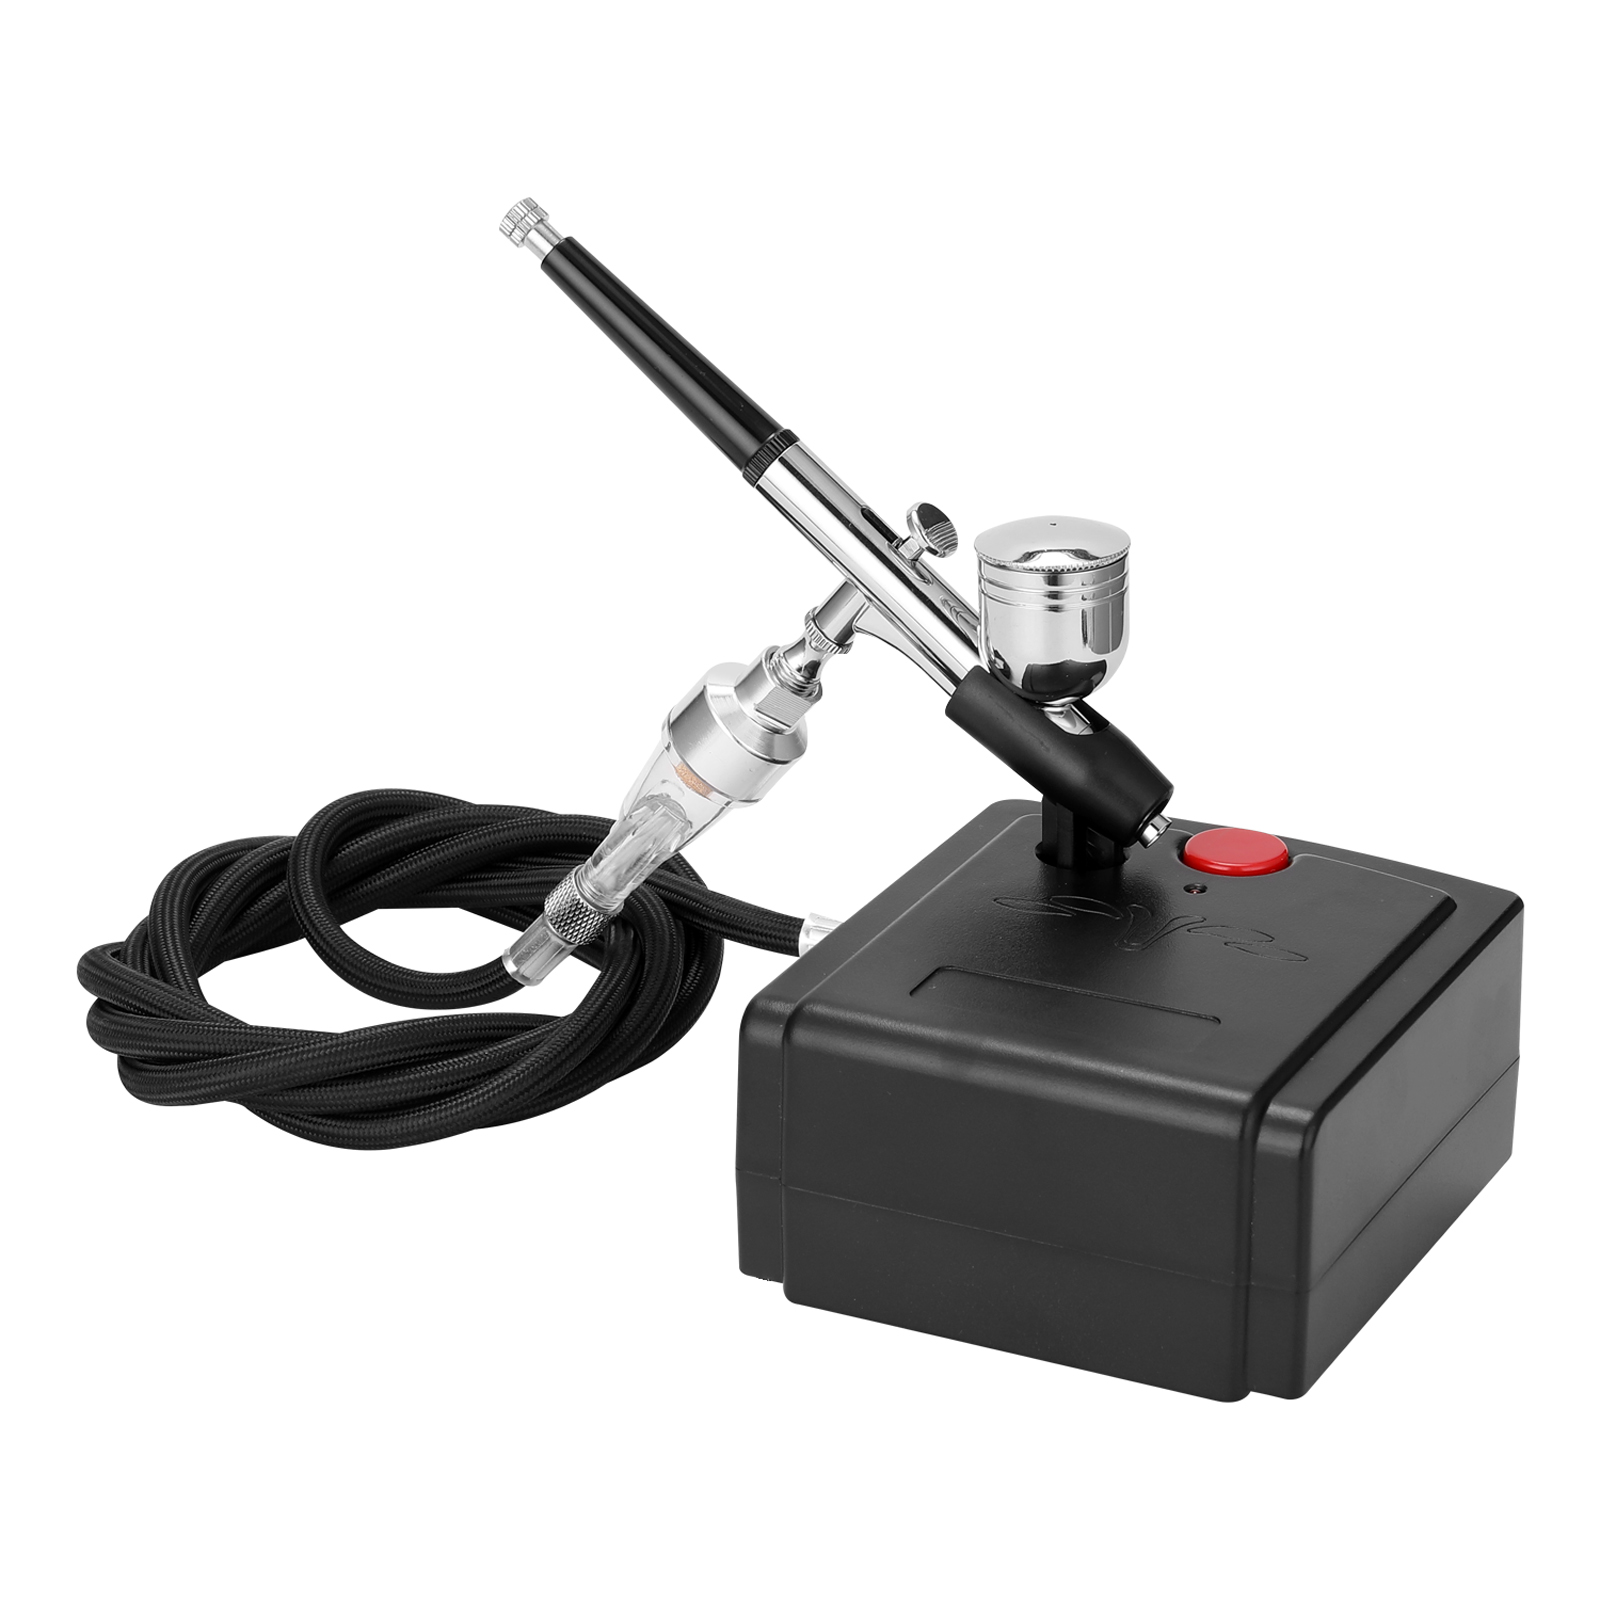 SEVIBT Airbrush Kit - Rechargeable Handheld Airbrush Compressor